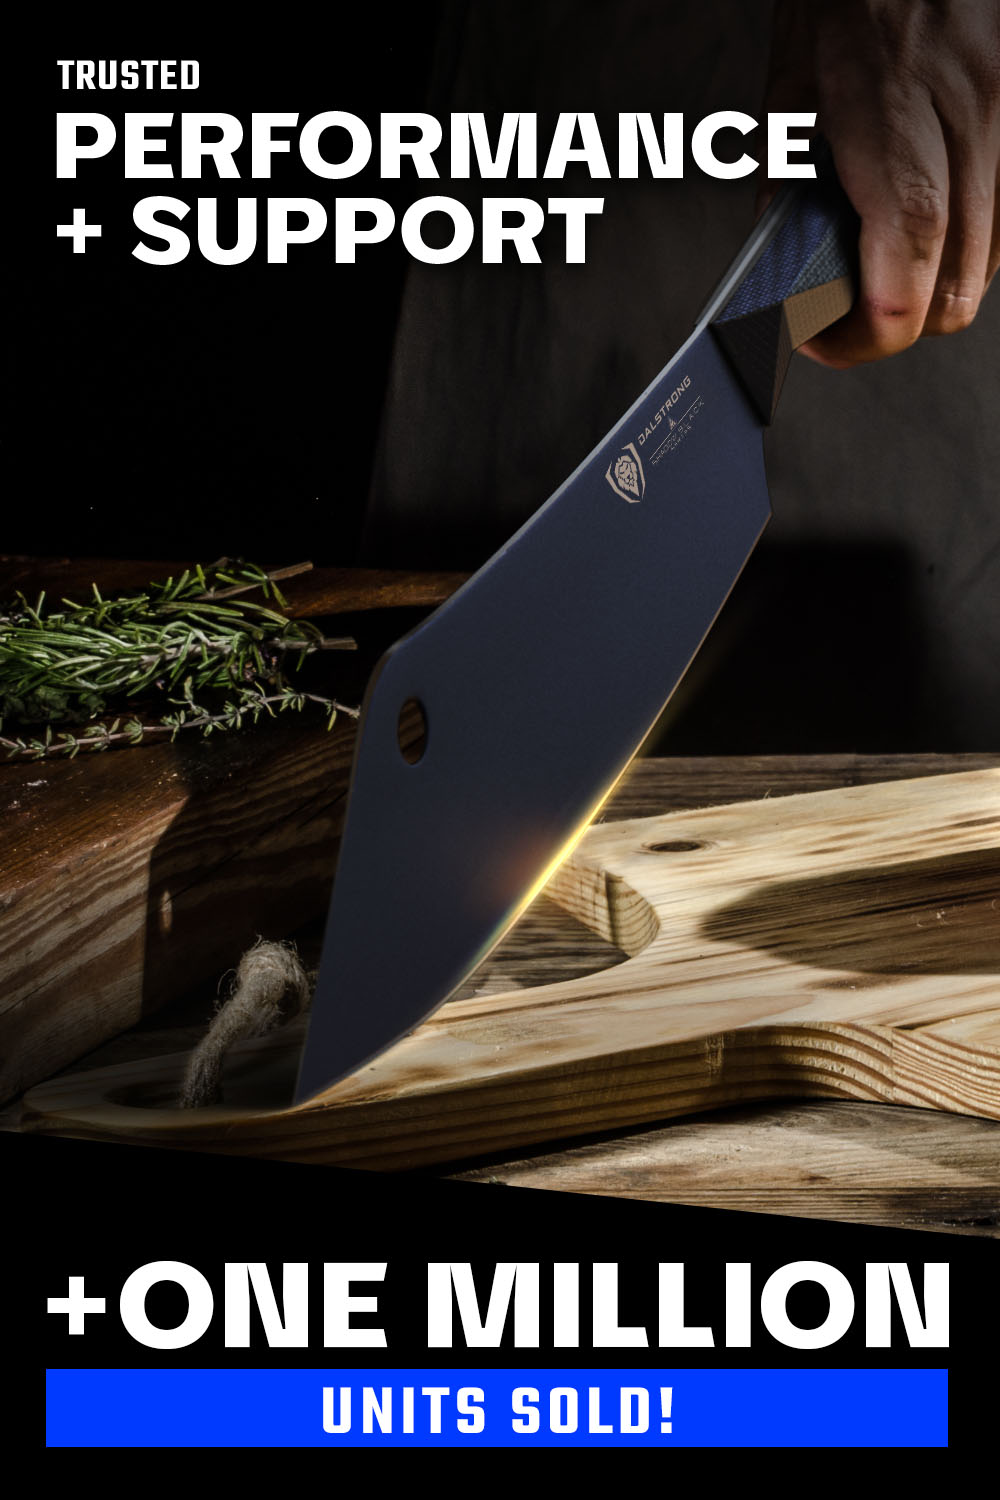 Cleaver Hybrid Chef's Knife 8" | Crixus | NSF Certified | Shadow Black Series | Dalstrong ©